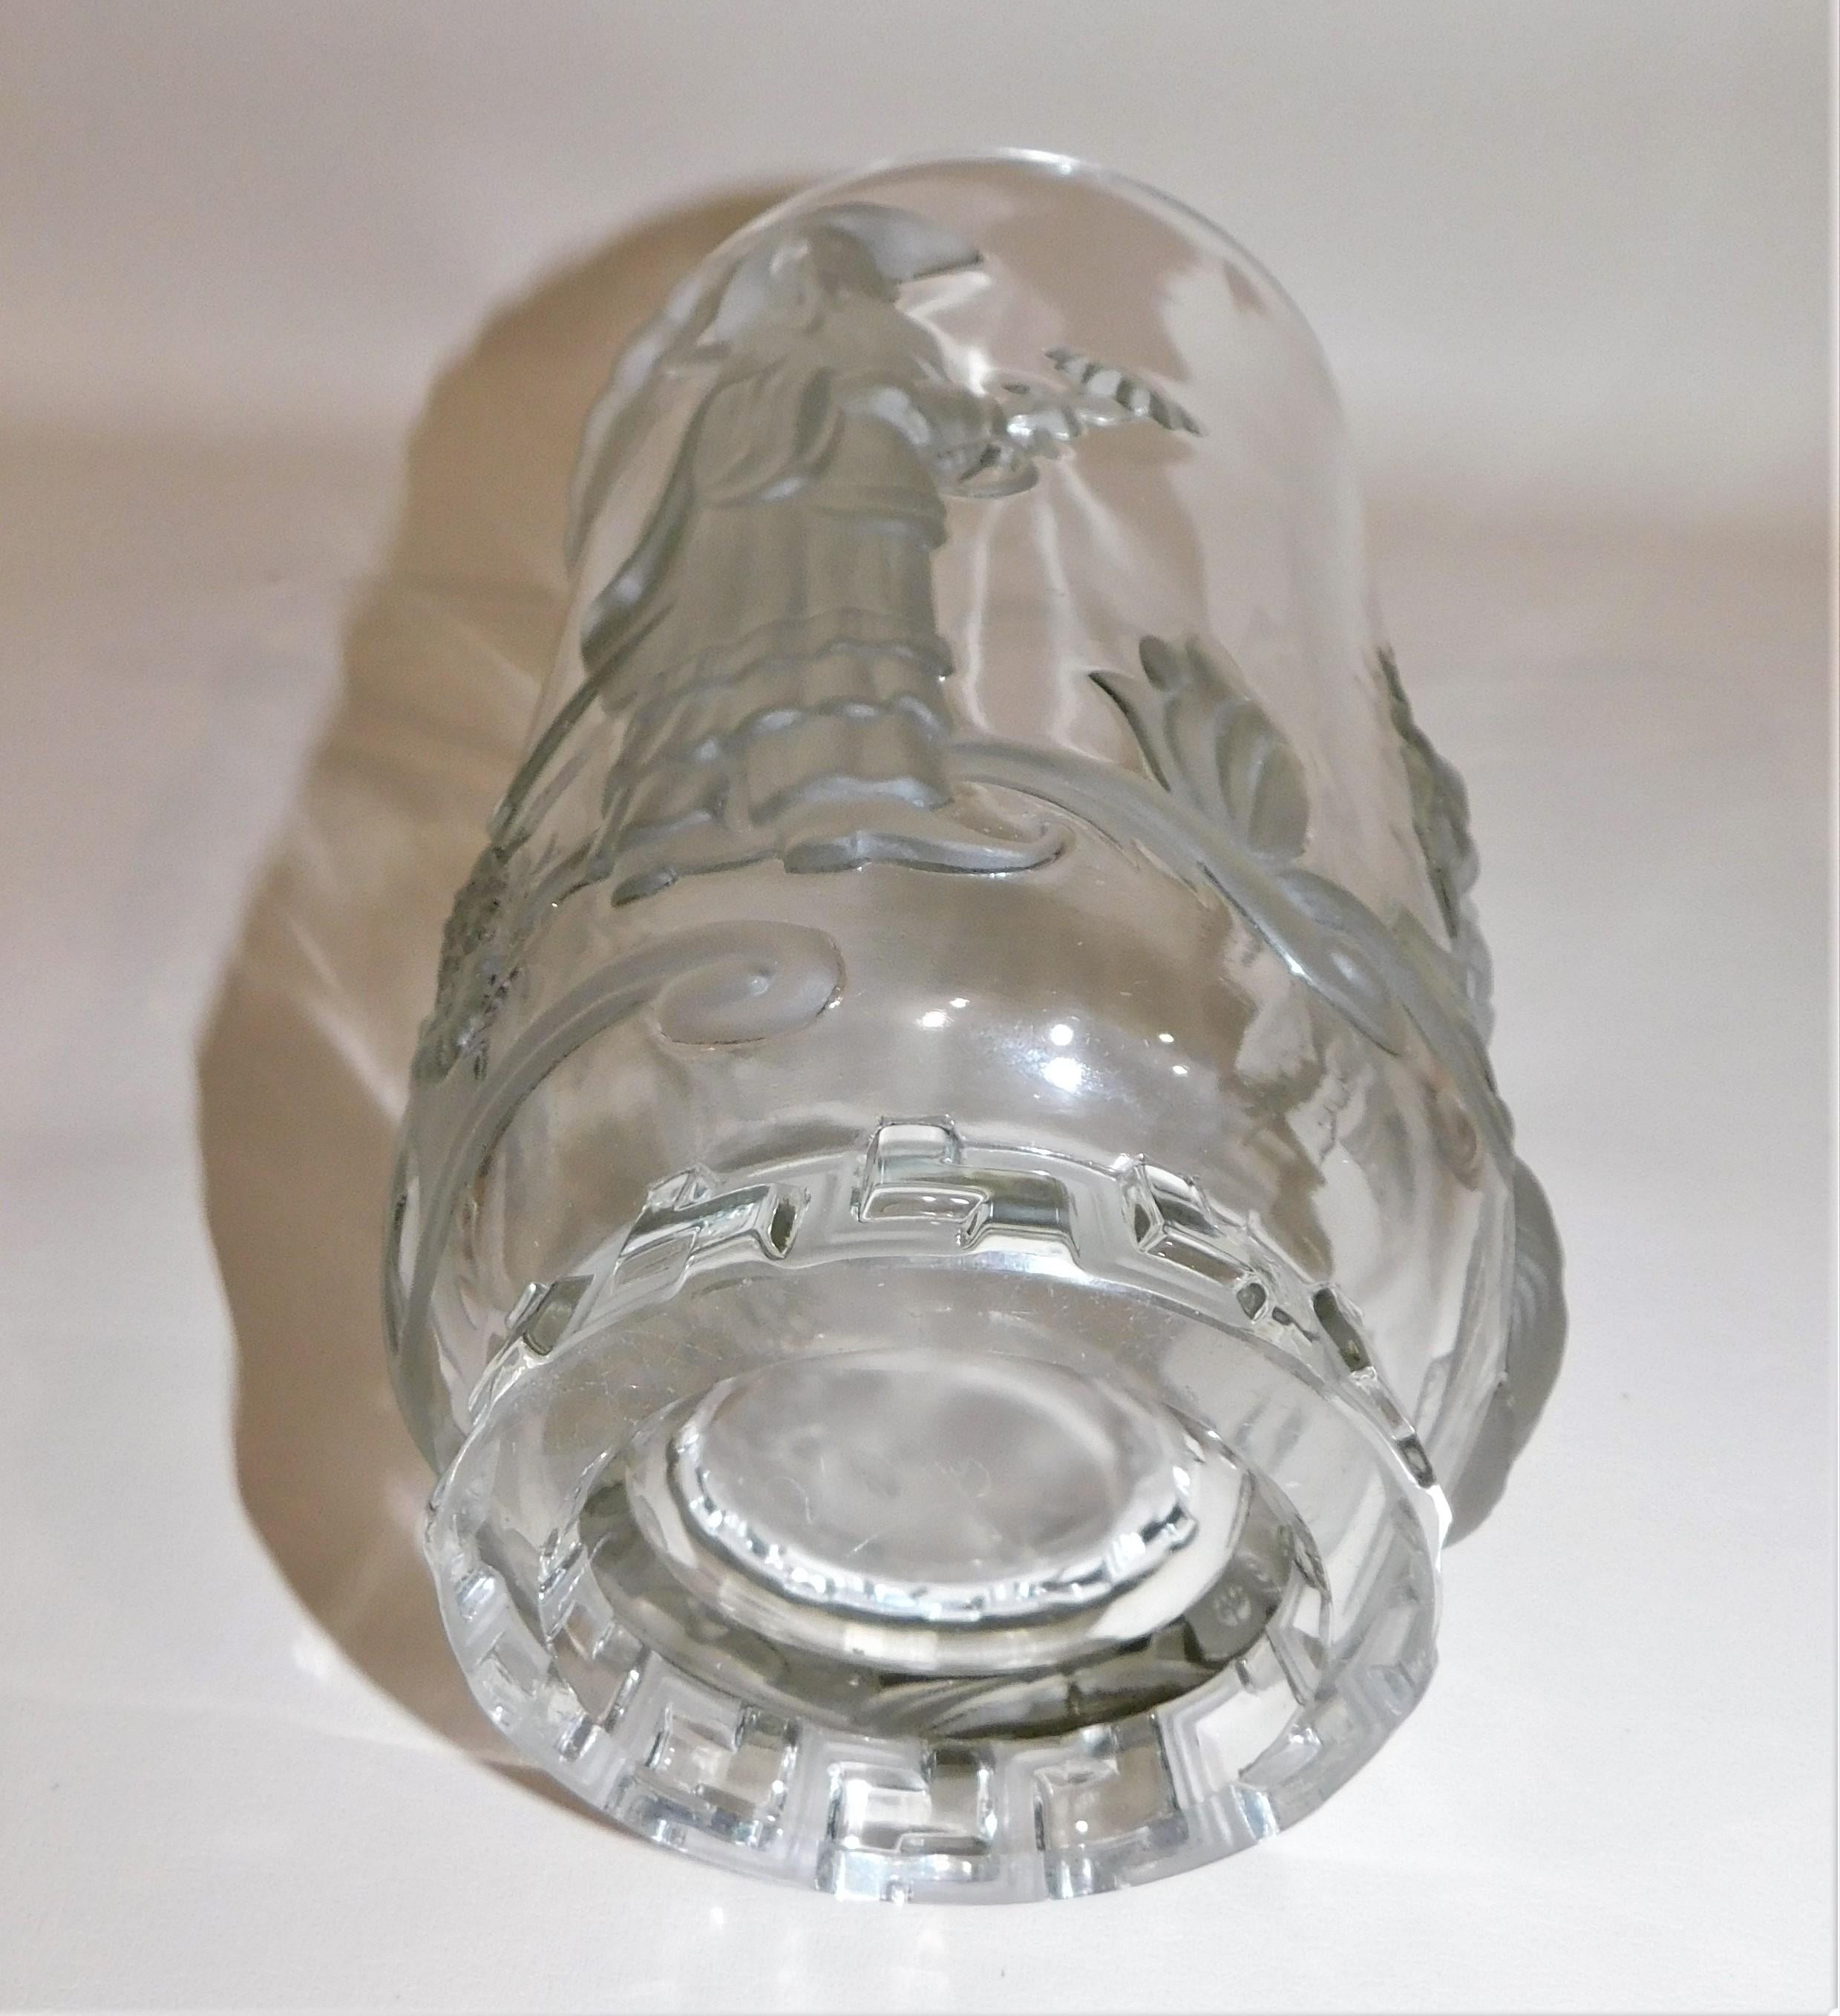 American Crystal Art Glass Verlys Vase with Chinese Mandarin Design In Good Condition For Sale In Hamilton, Ontario